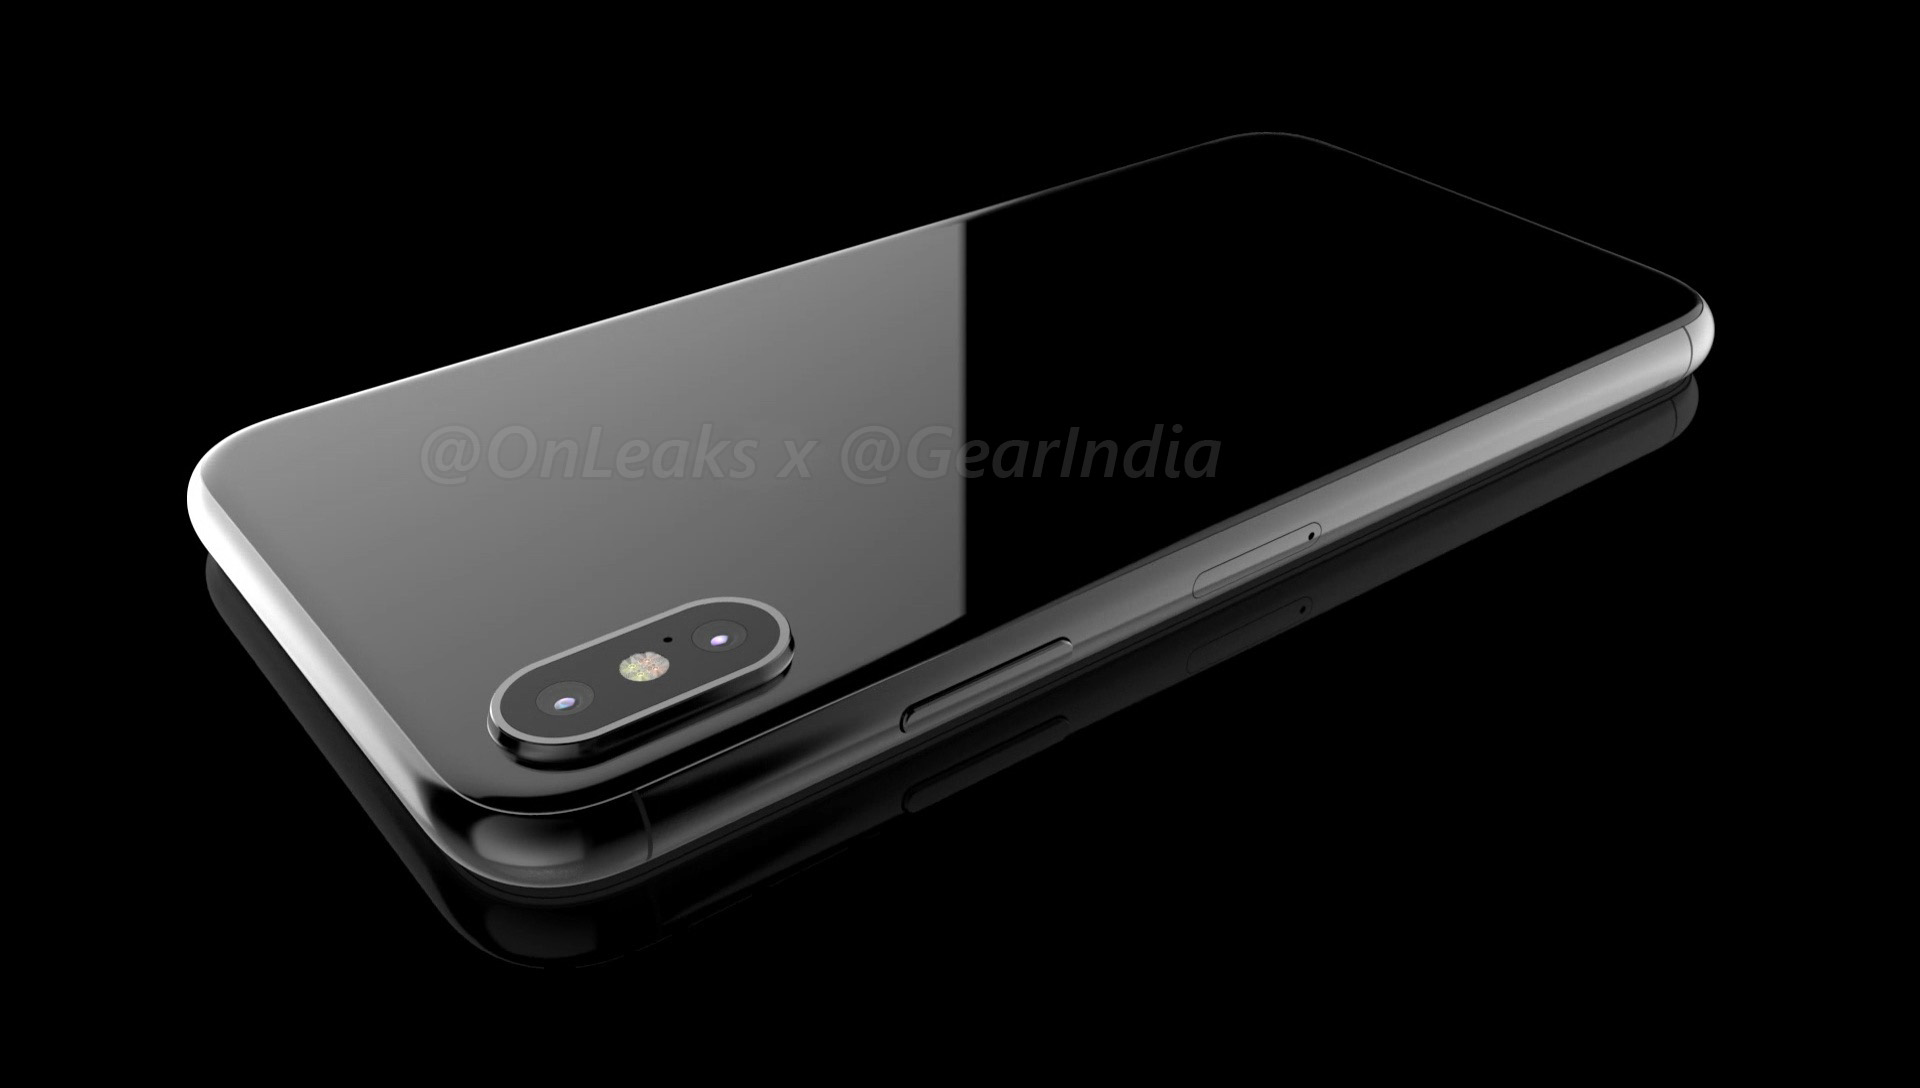 Apple's 'iPhone 8' Might Not Ship Until Late 2017, Side Button Touch ID